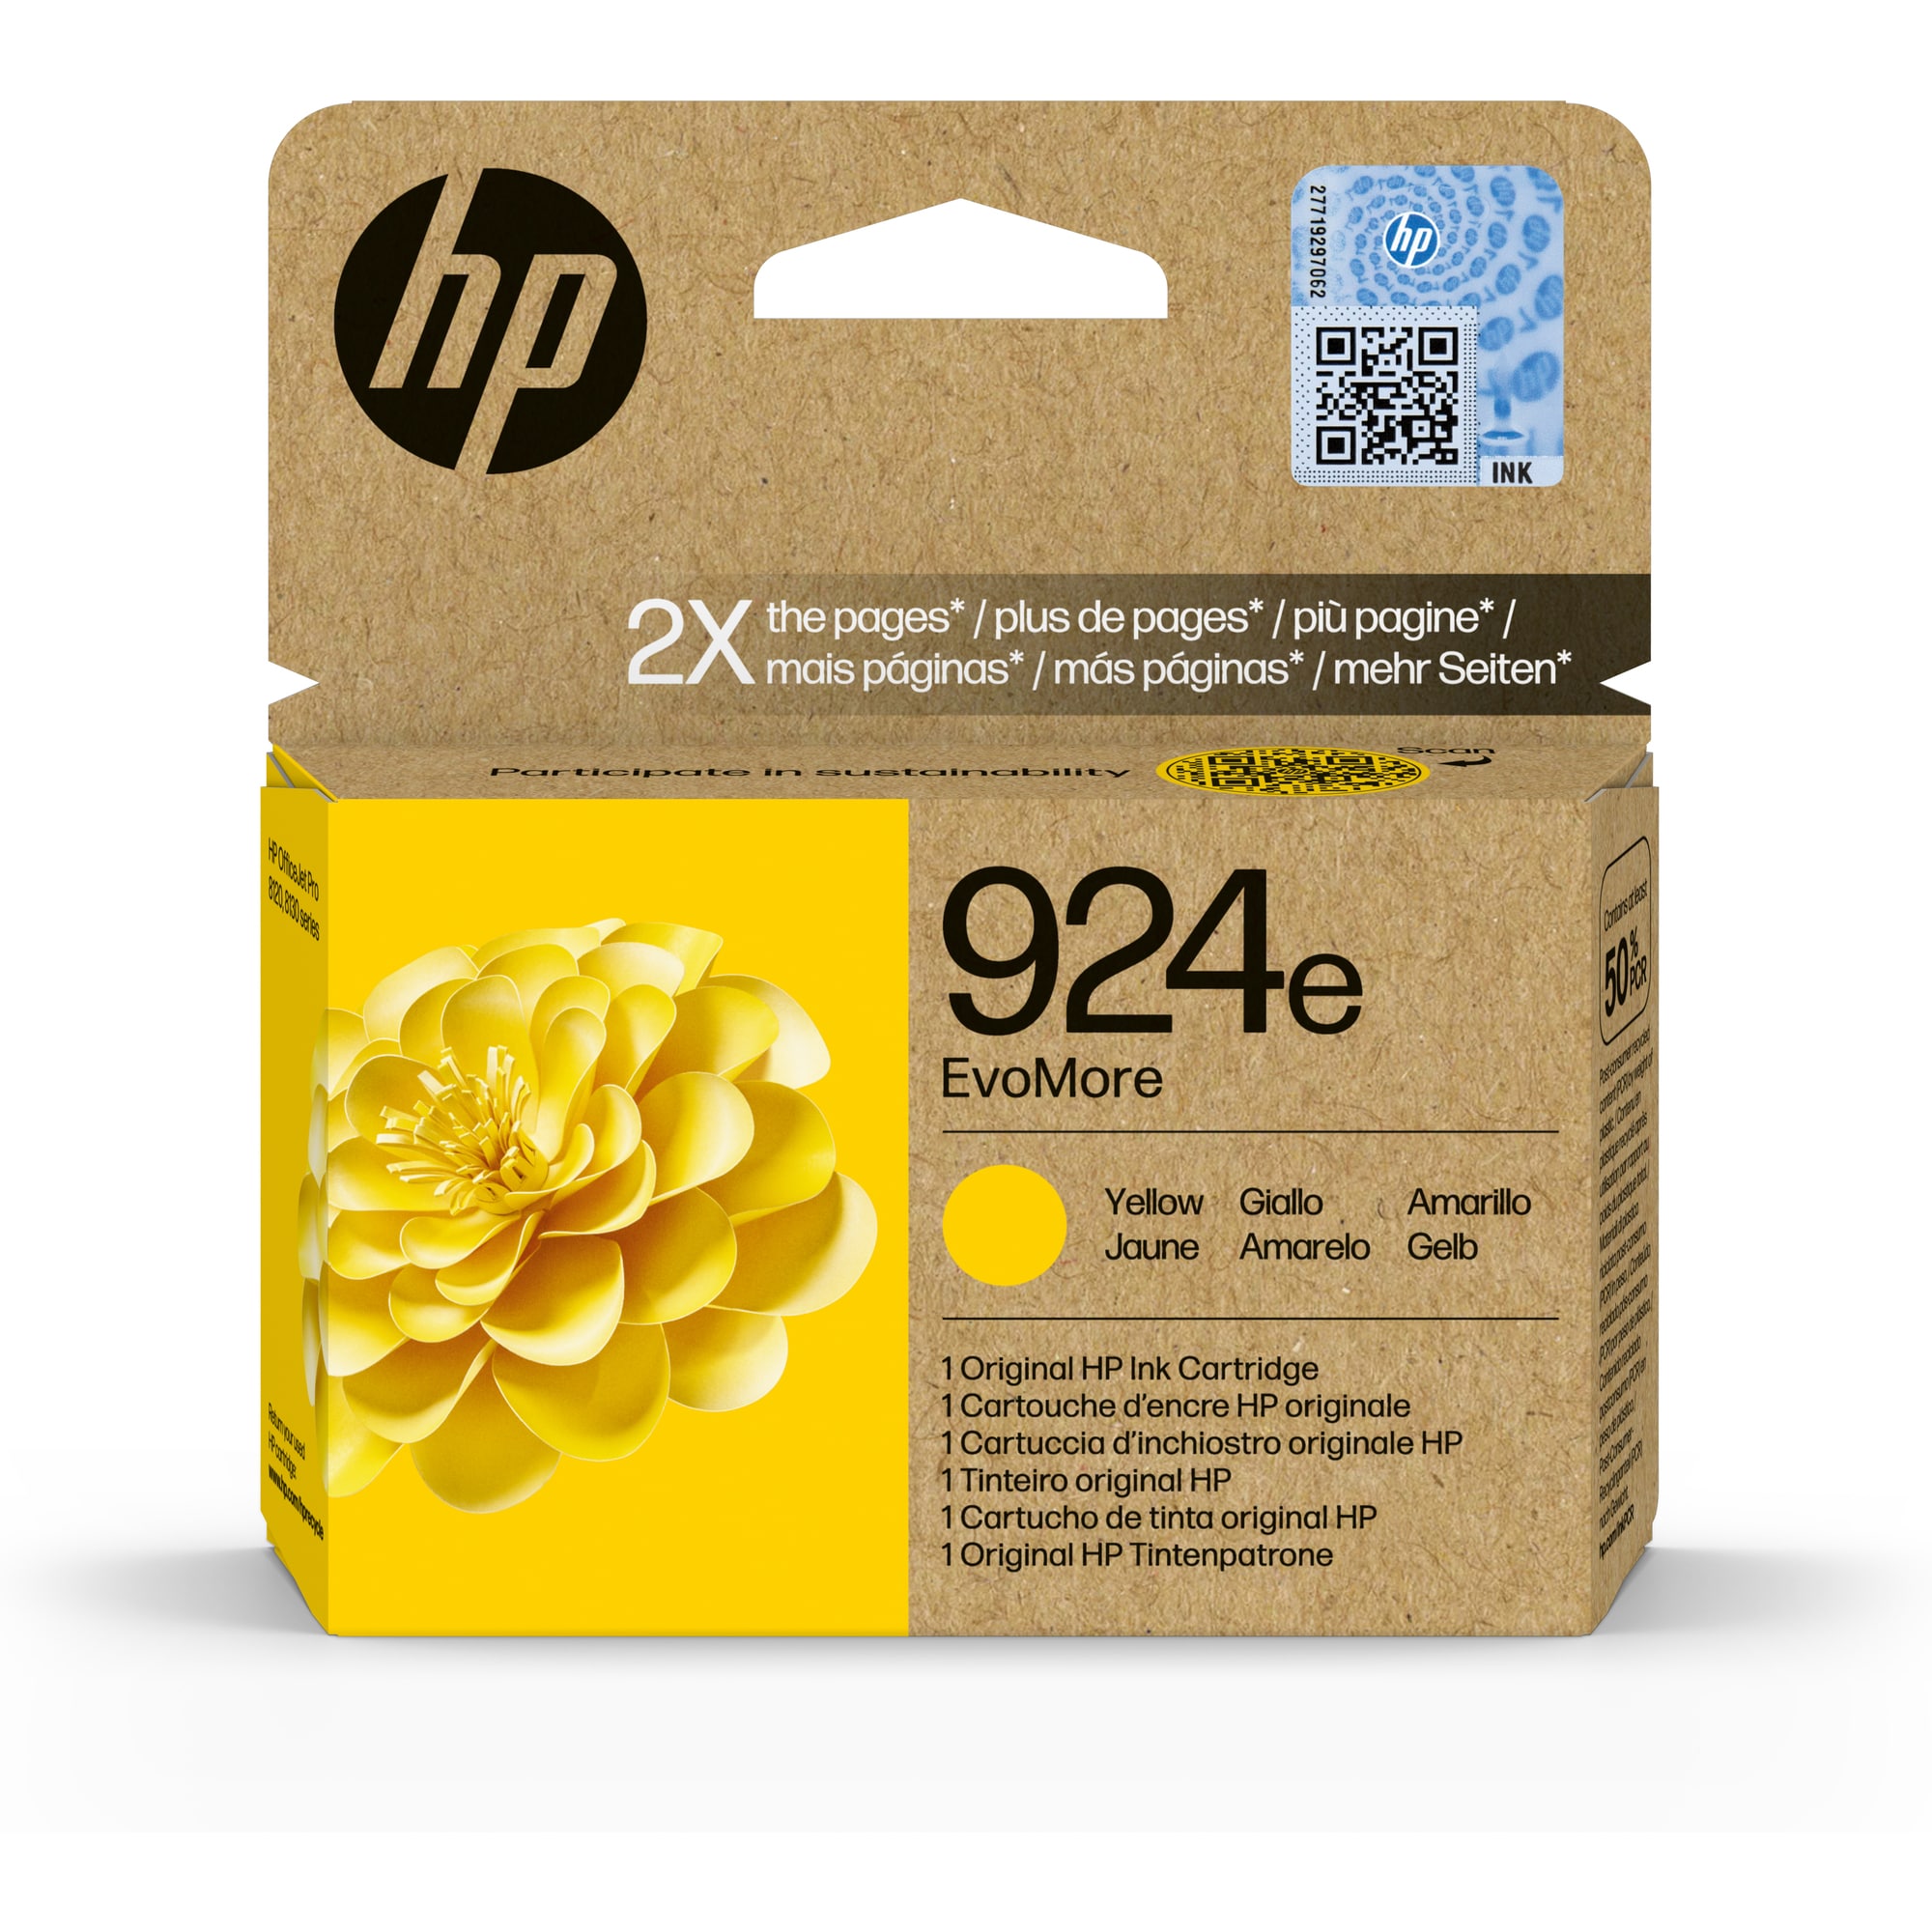 HP 924e EvoMore Yellow Original Ink Cartridge (800 pages)1 